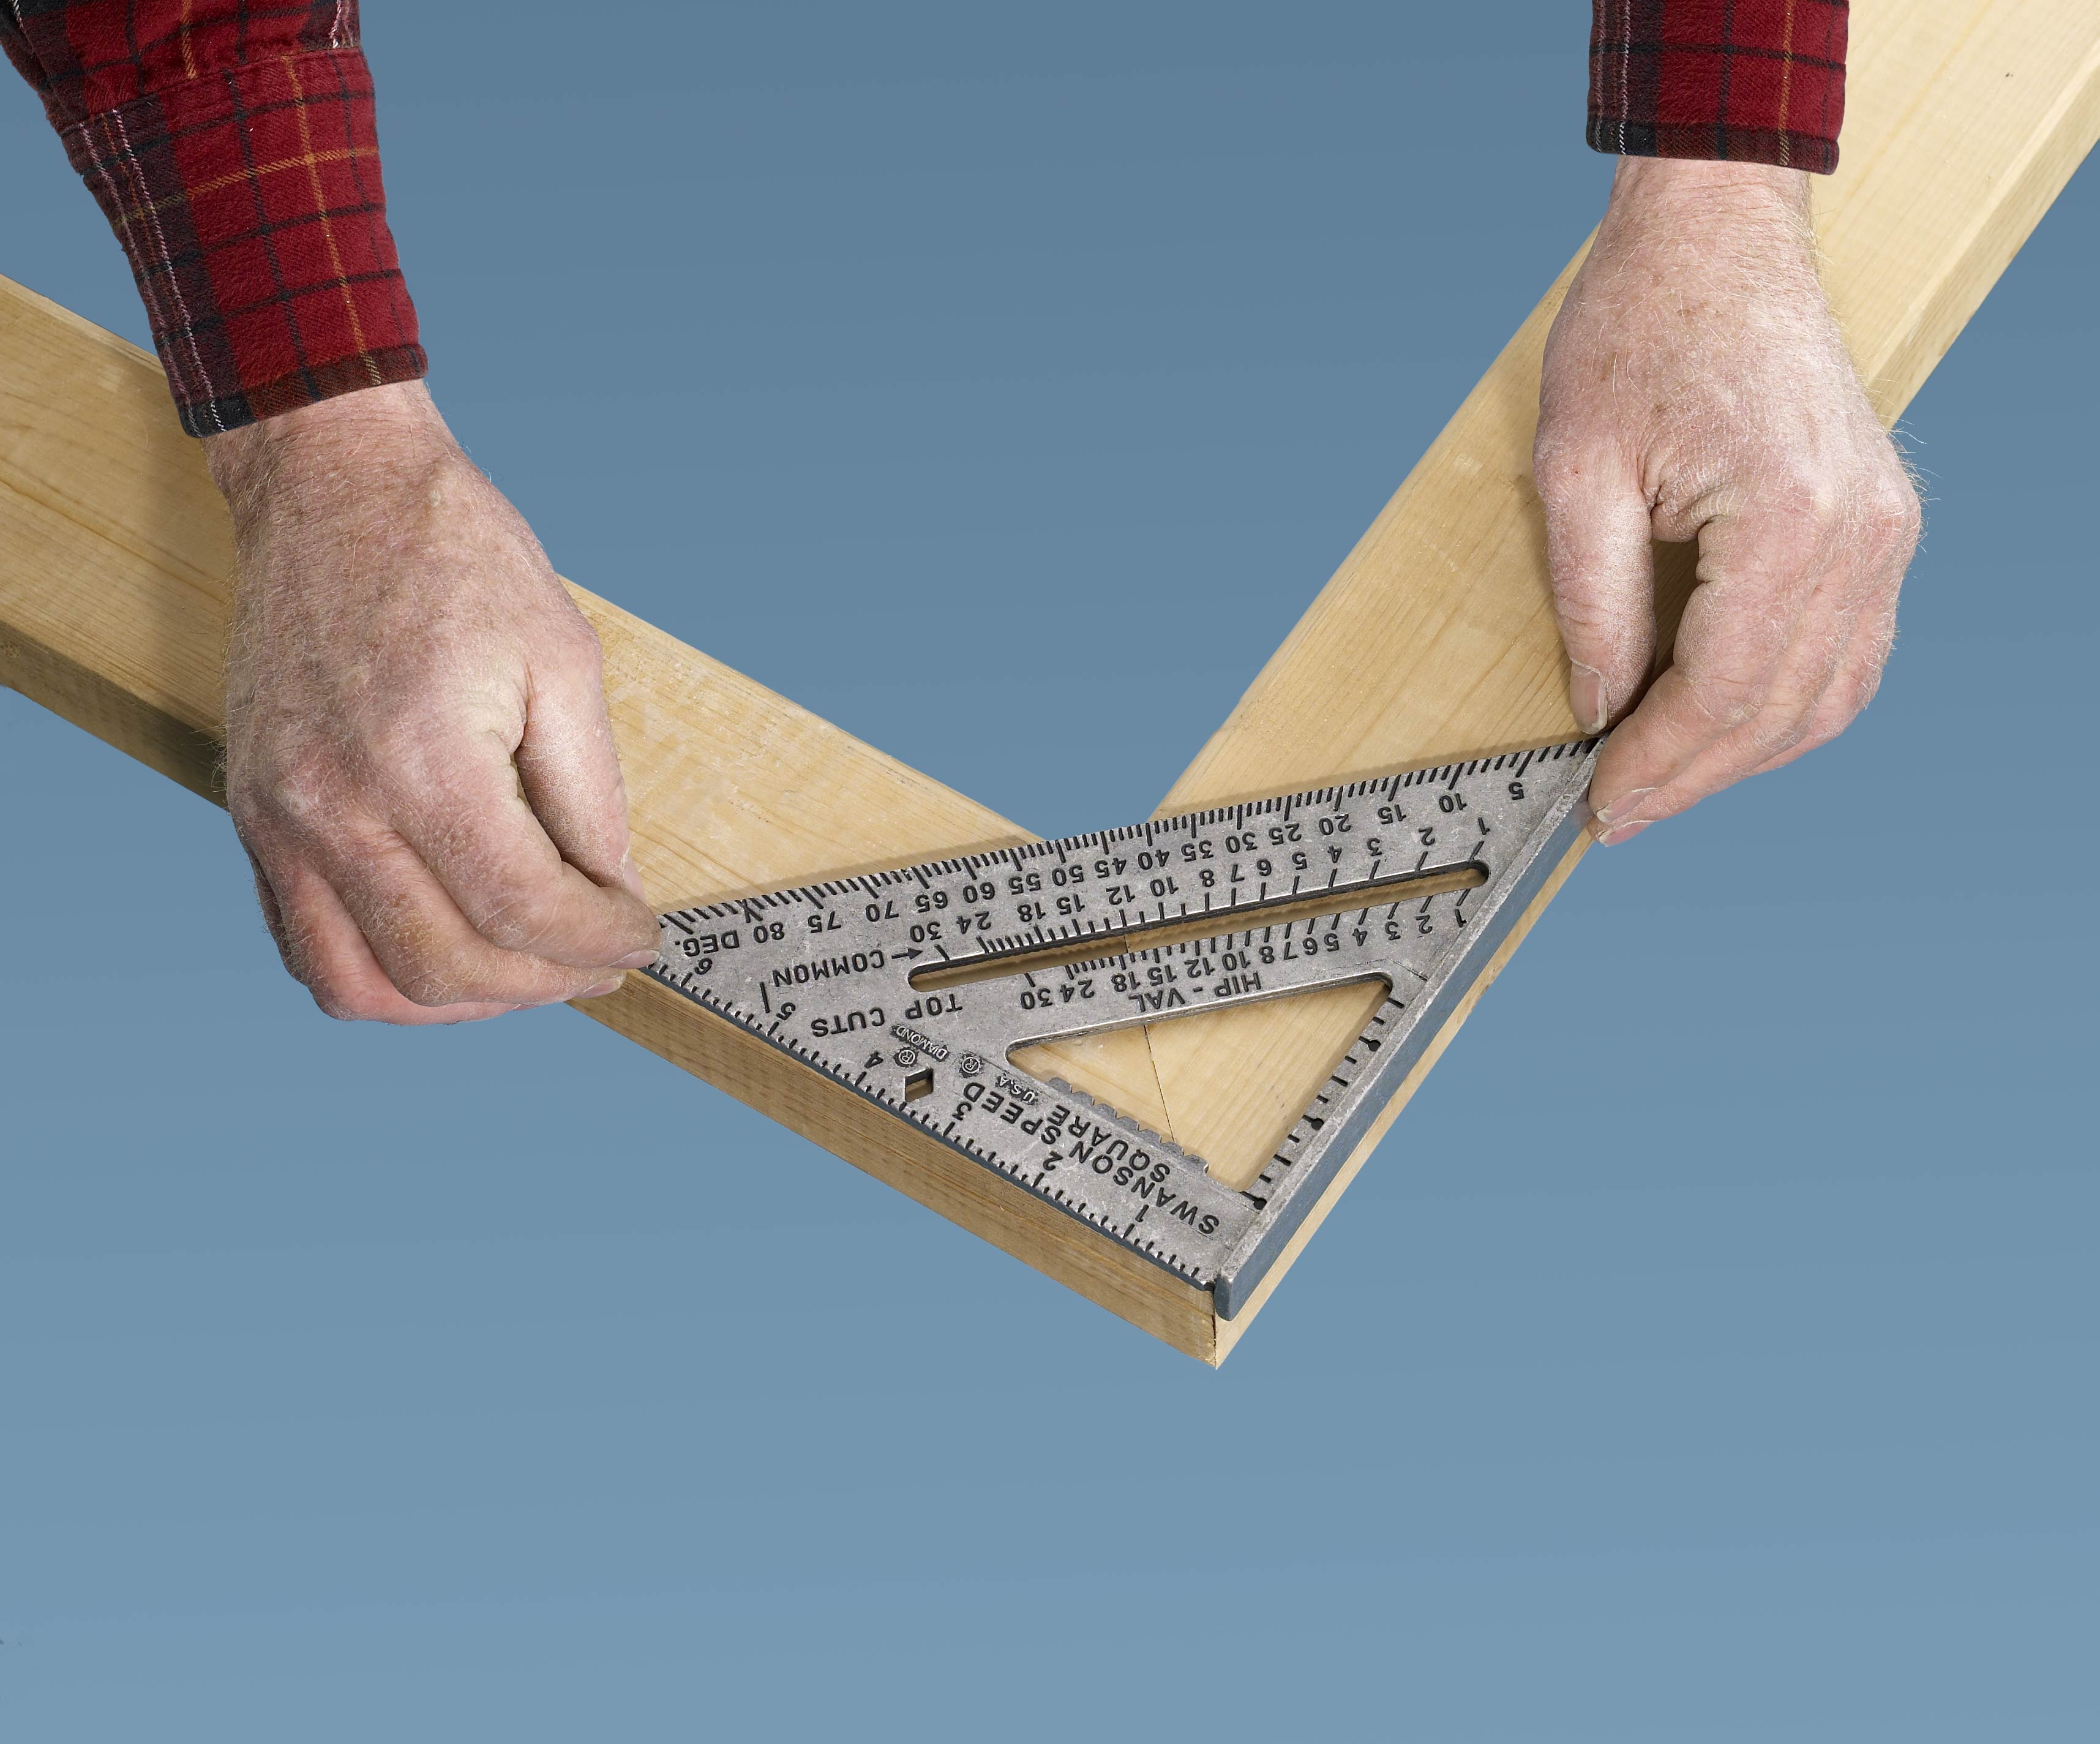 Top 10 Uses of a Rafter square, aka speed square 